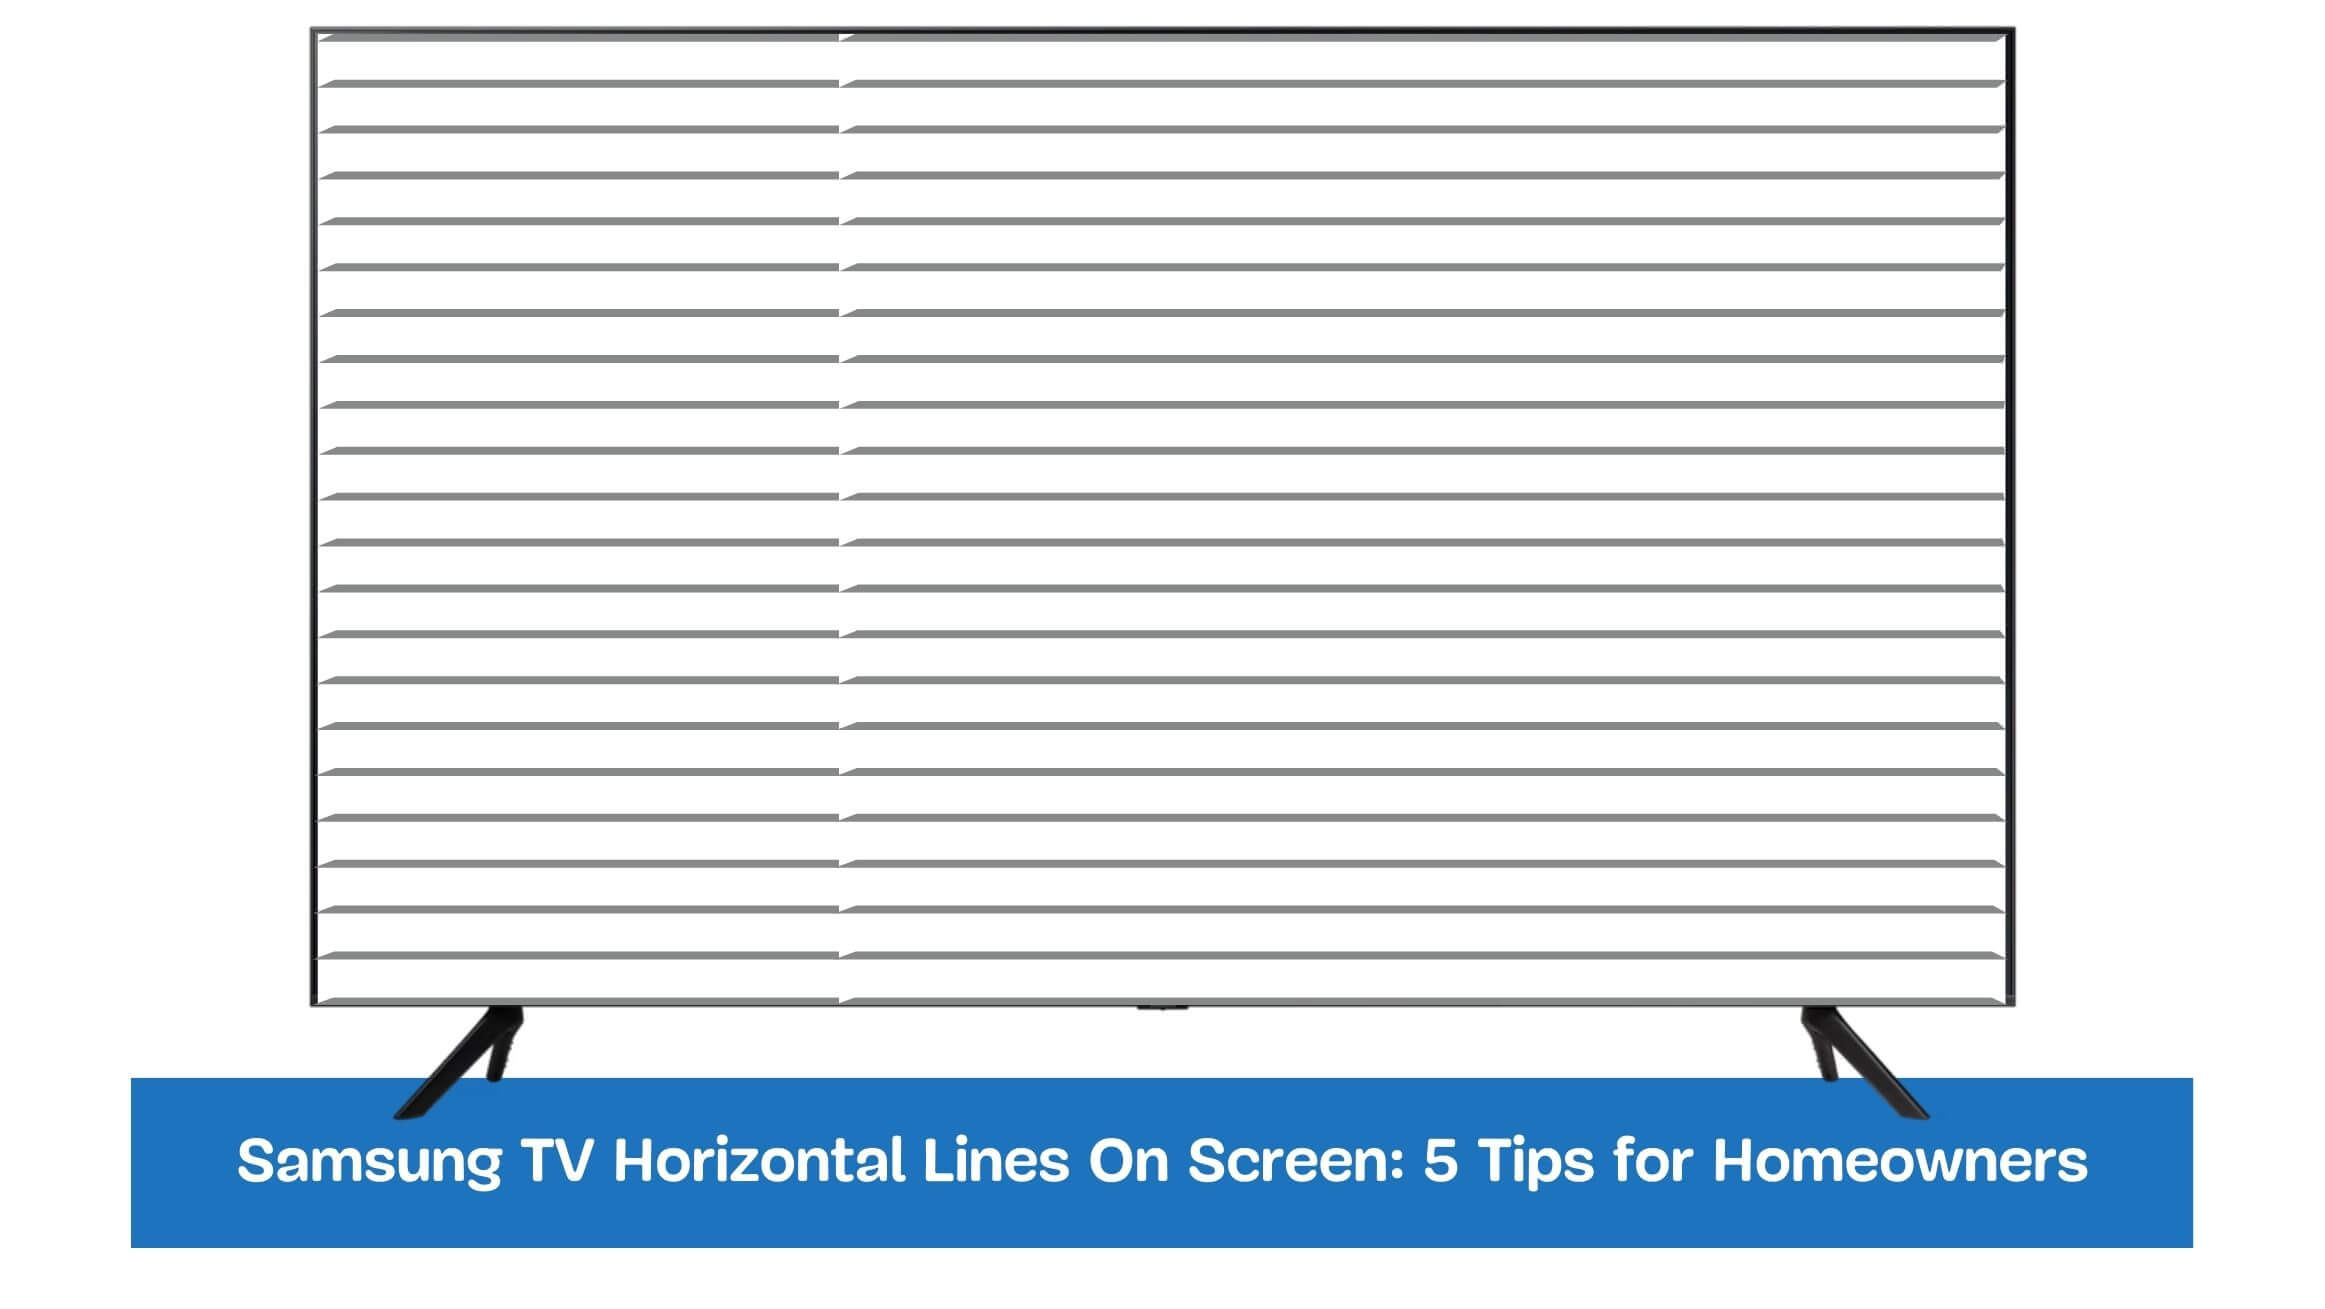 Samsung TV Horizontal Lines On Screen: 5 Tips for Homeowners